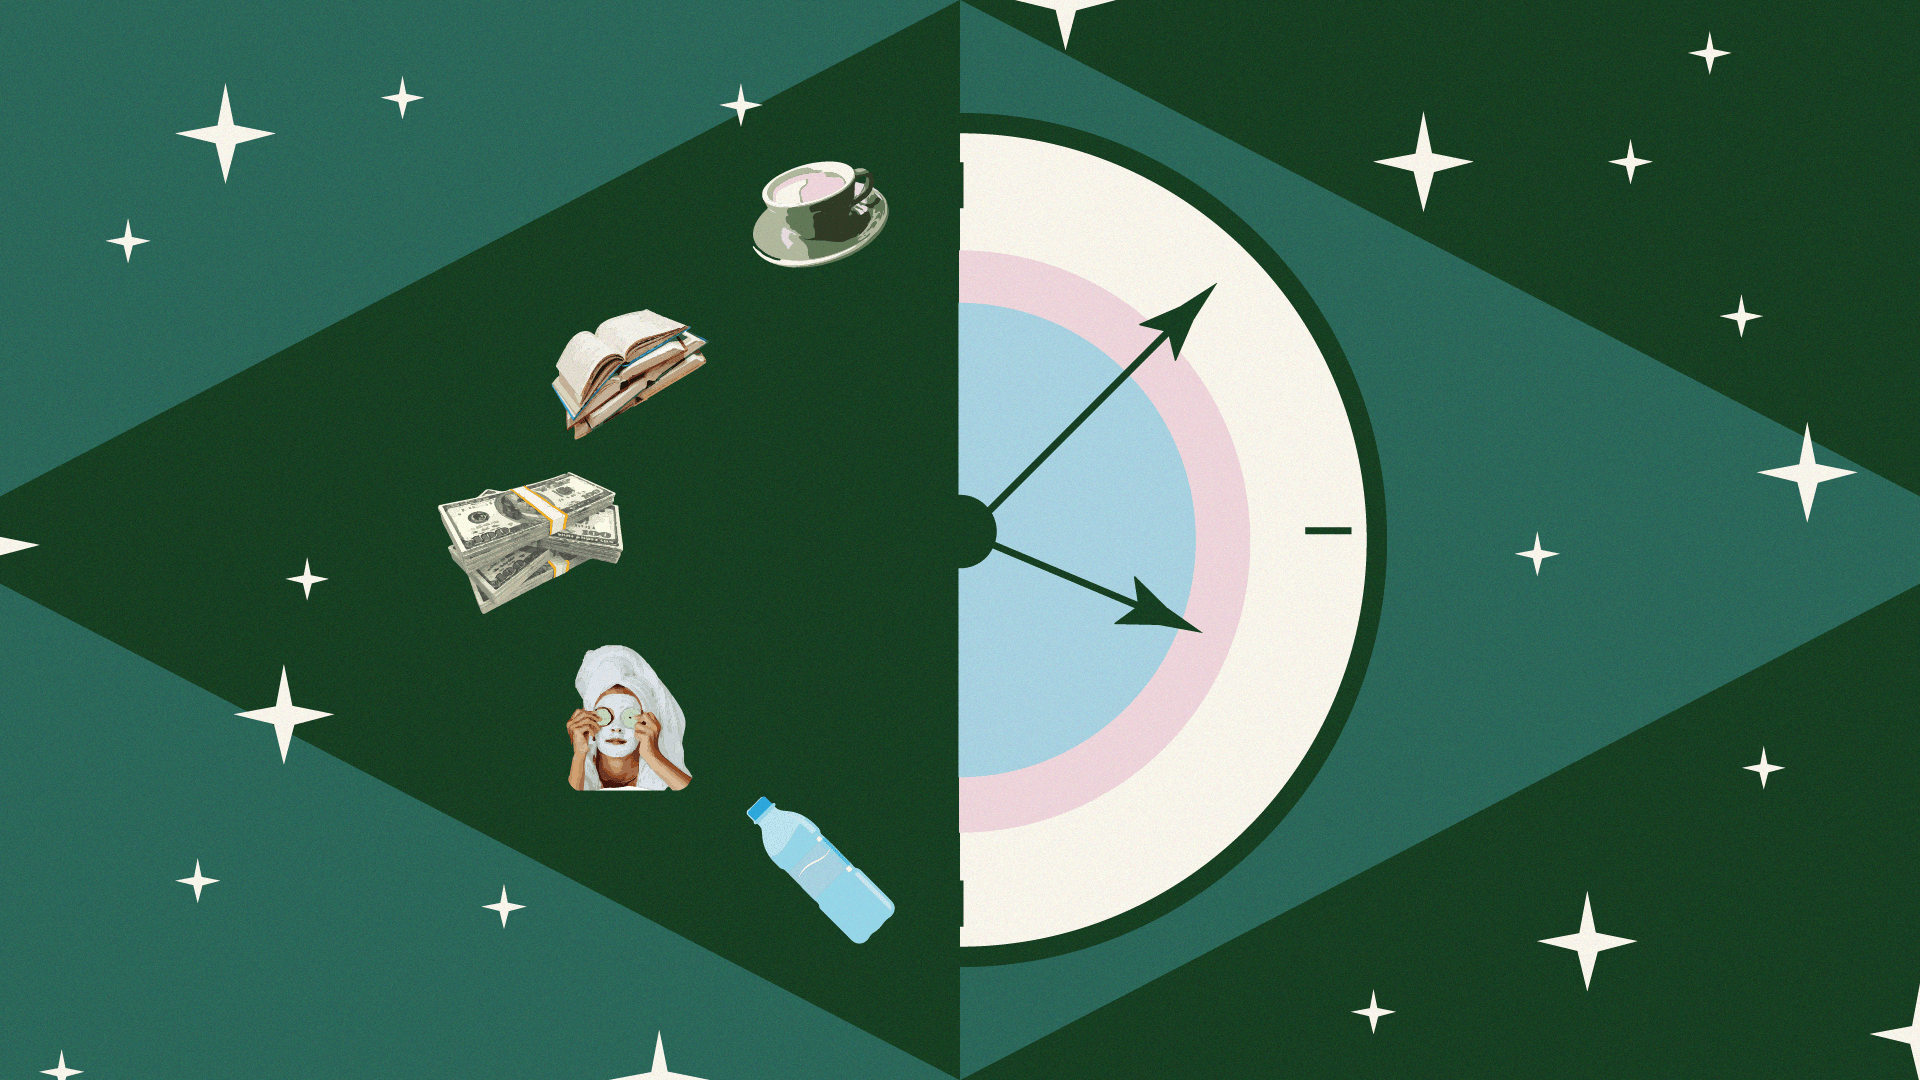 This illustration shows common objects associated with self-care (like spa days, tea, and books) juxtaposed with an analog clock.